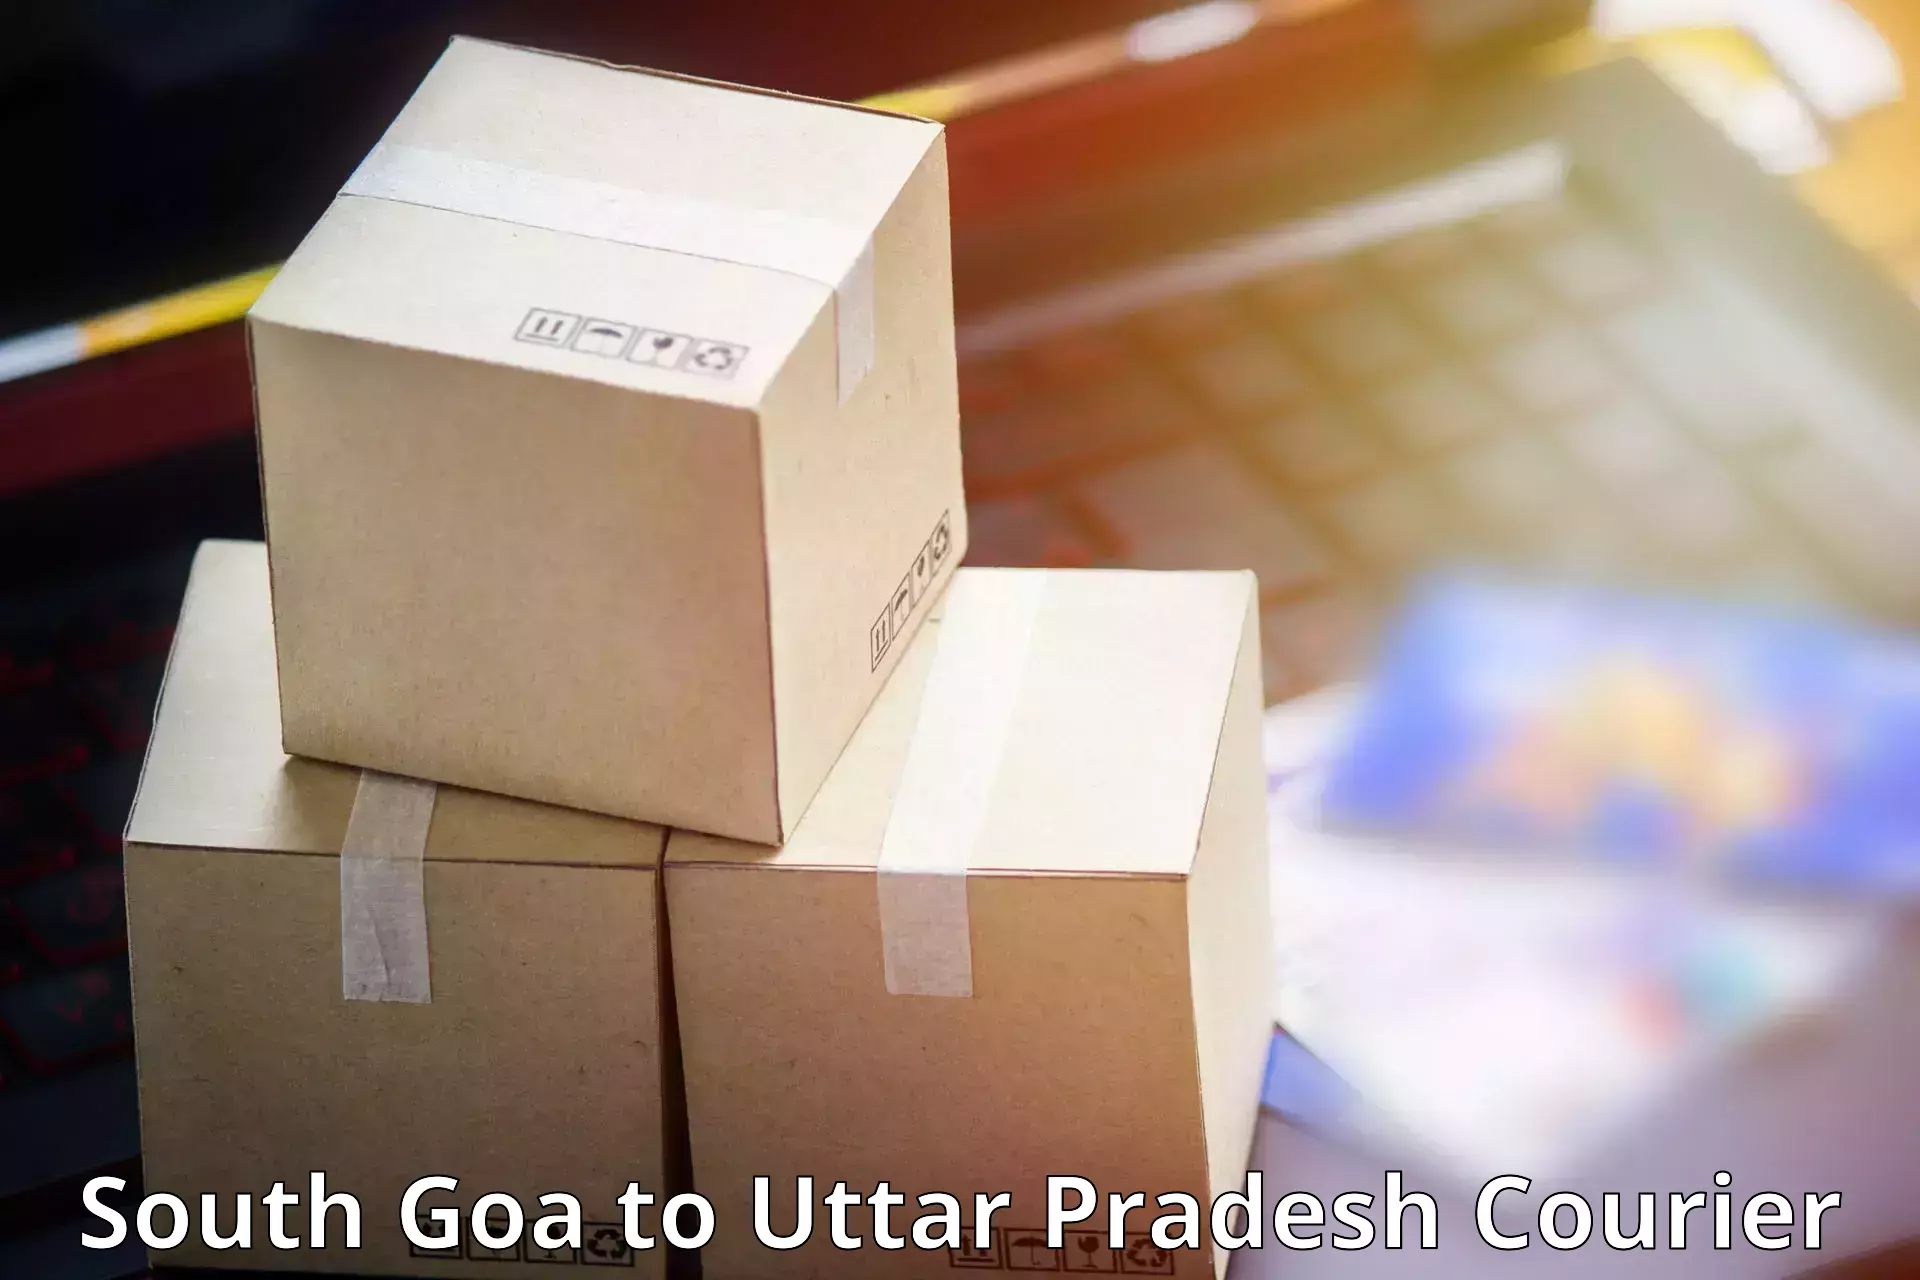 Courier dispatch services in South Goa to Lambhua